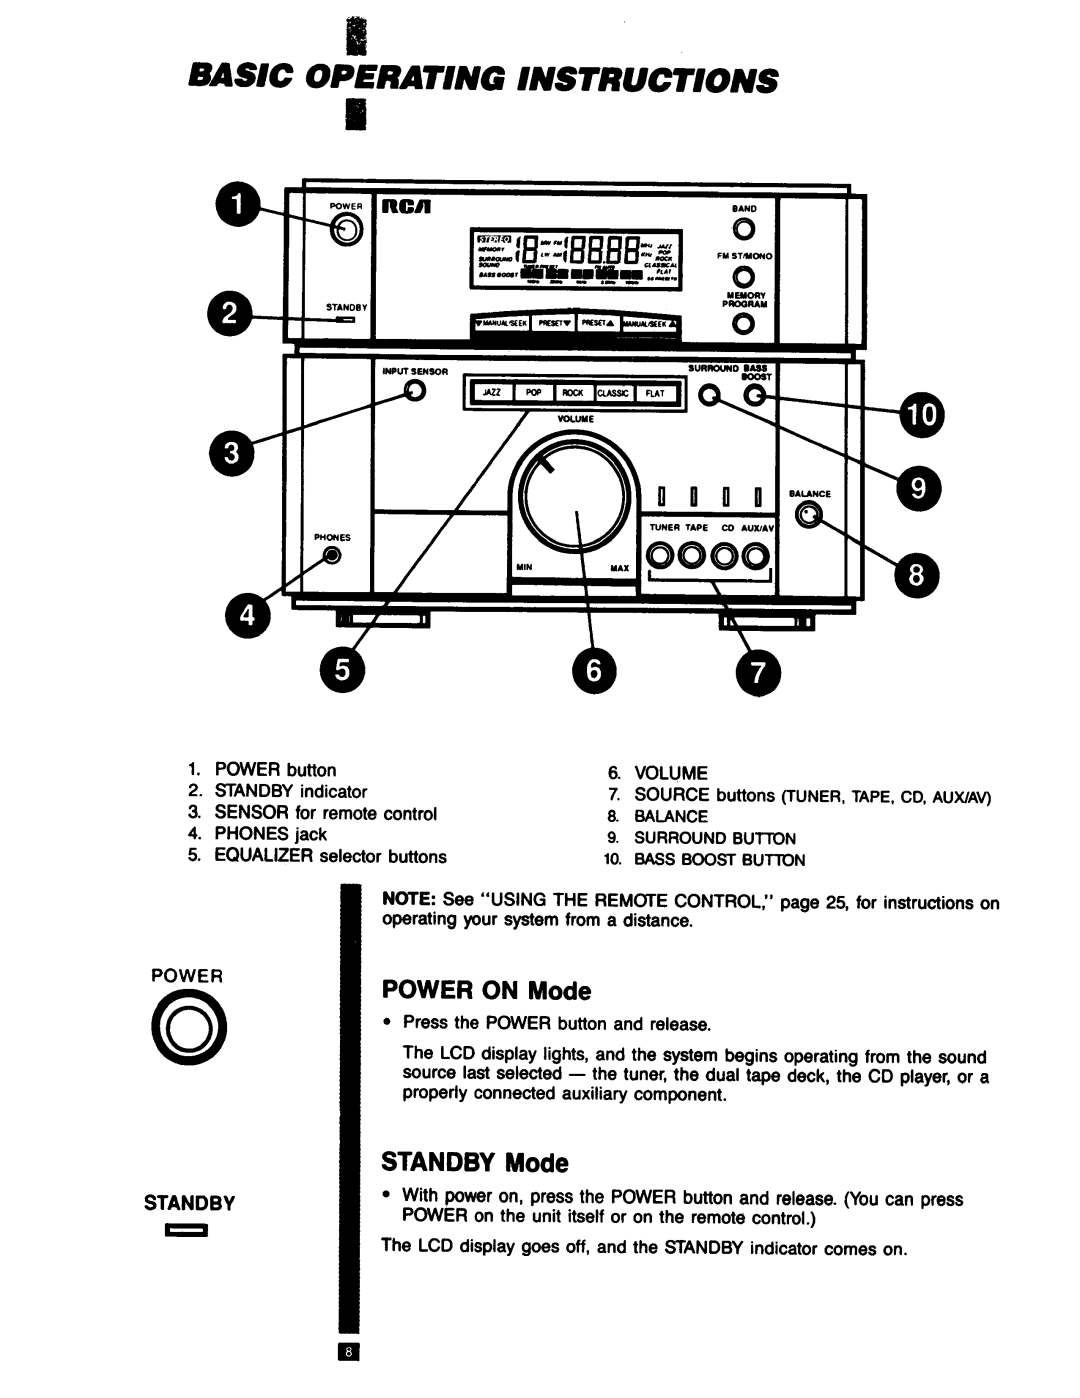 RCA RP-9753 manual Basic Operating Instructions, POWER ON Mode, STANDBY Mode, Standby 